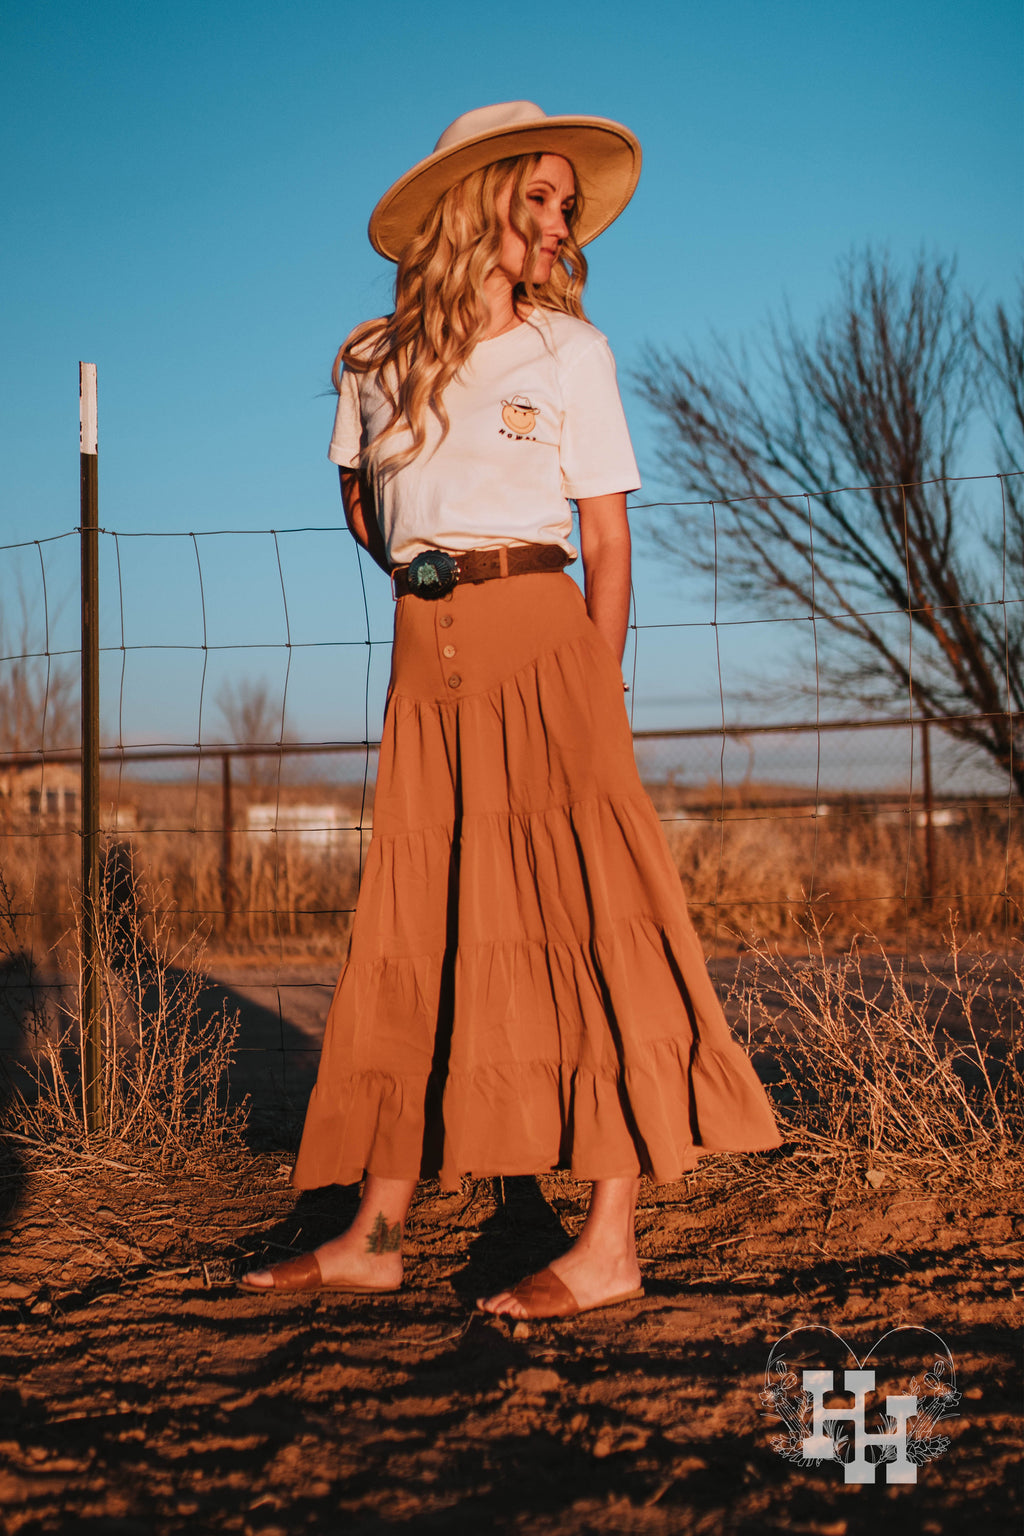 Girl wering a 4 tiered western style maxi skirt that is ankle length in a clay orange color. It has a high wast with 5 bottons. The skirt also has belt loops so she is wearing a leather belt with turquoise belt buckle. The skirt is being worn with a white thirts with a howdy smiley face in a cowboy hat on left breast area. She is also wearing a cream colored wide brim hat.